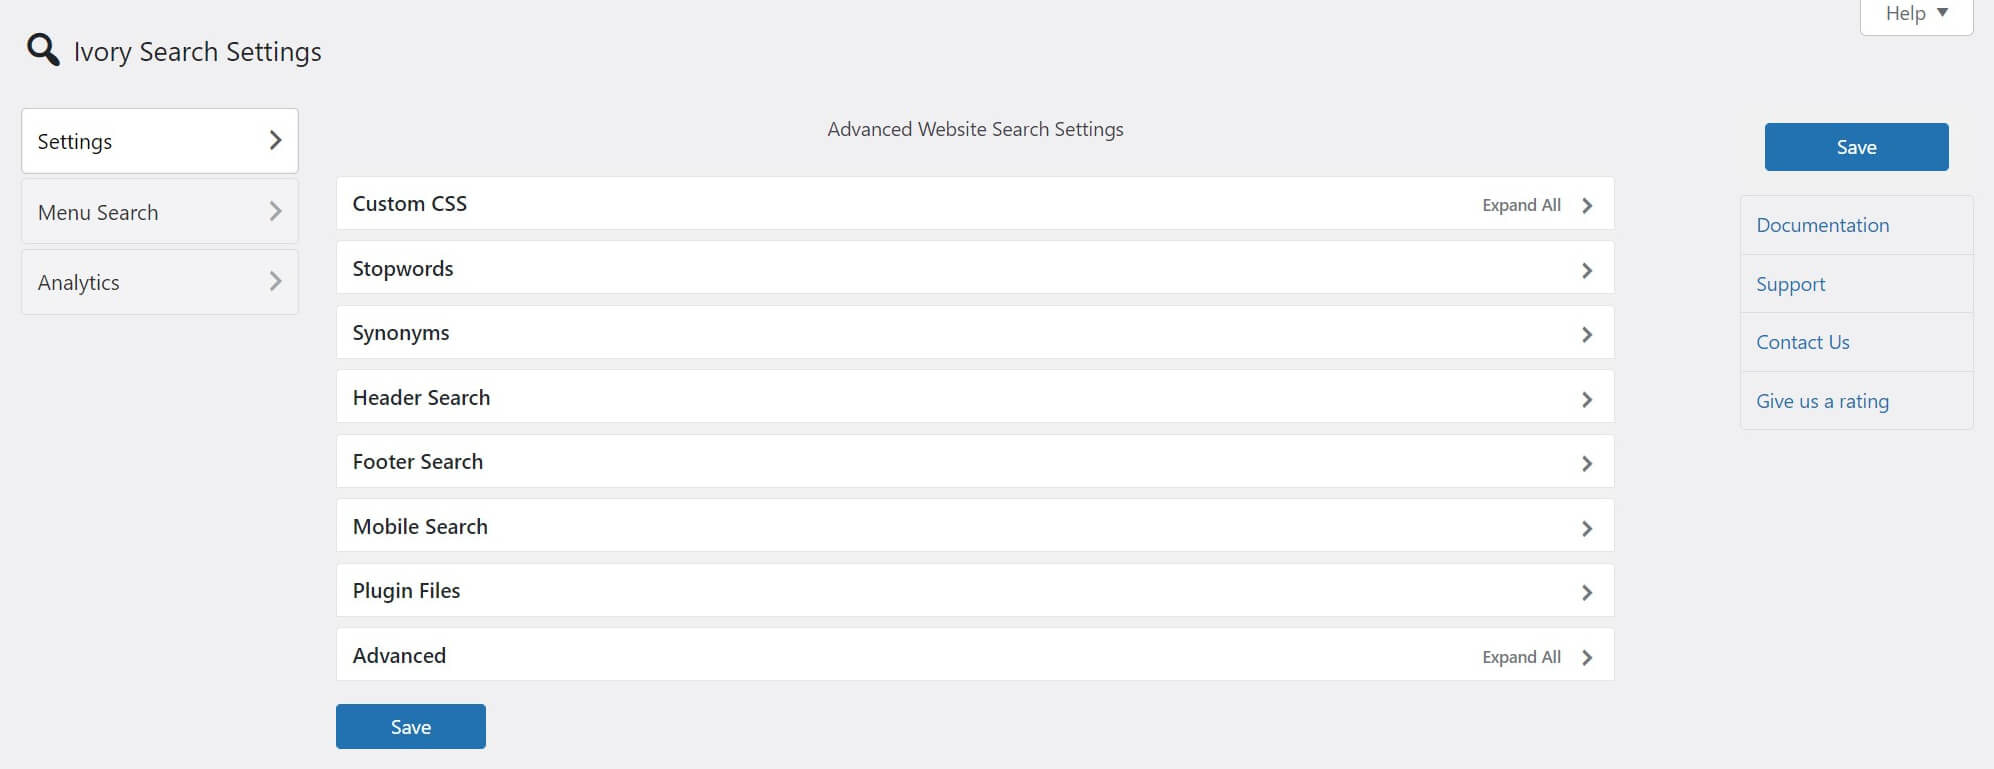 The Ivory Search settings screen.